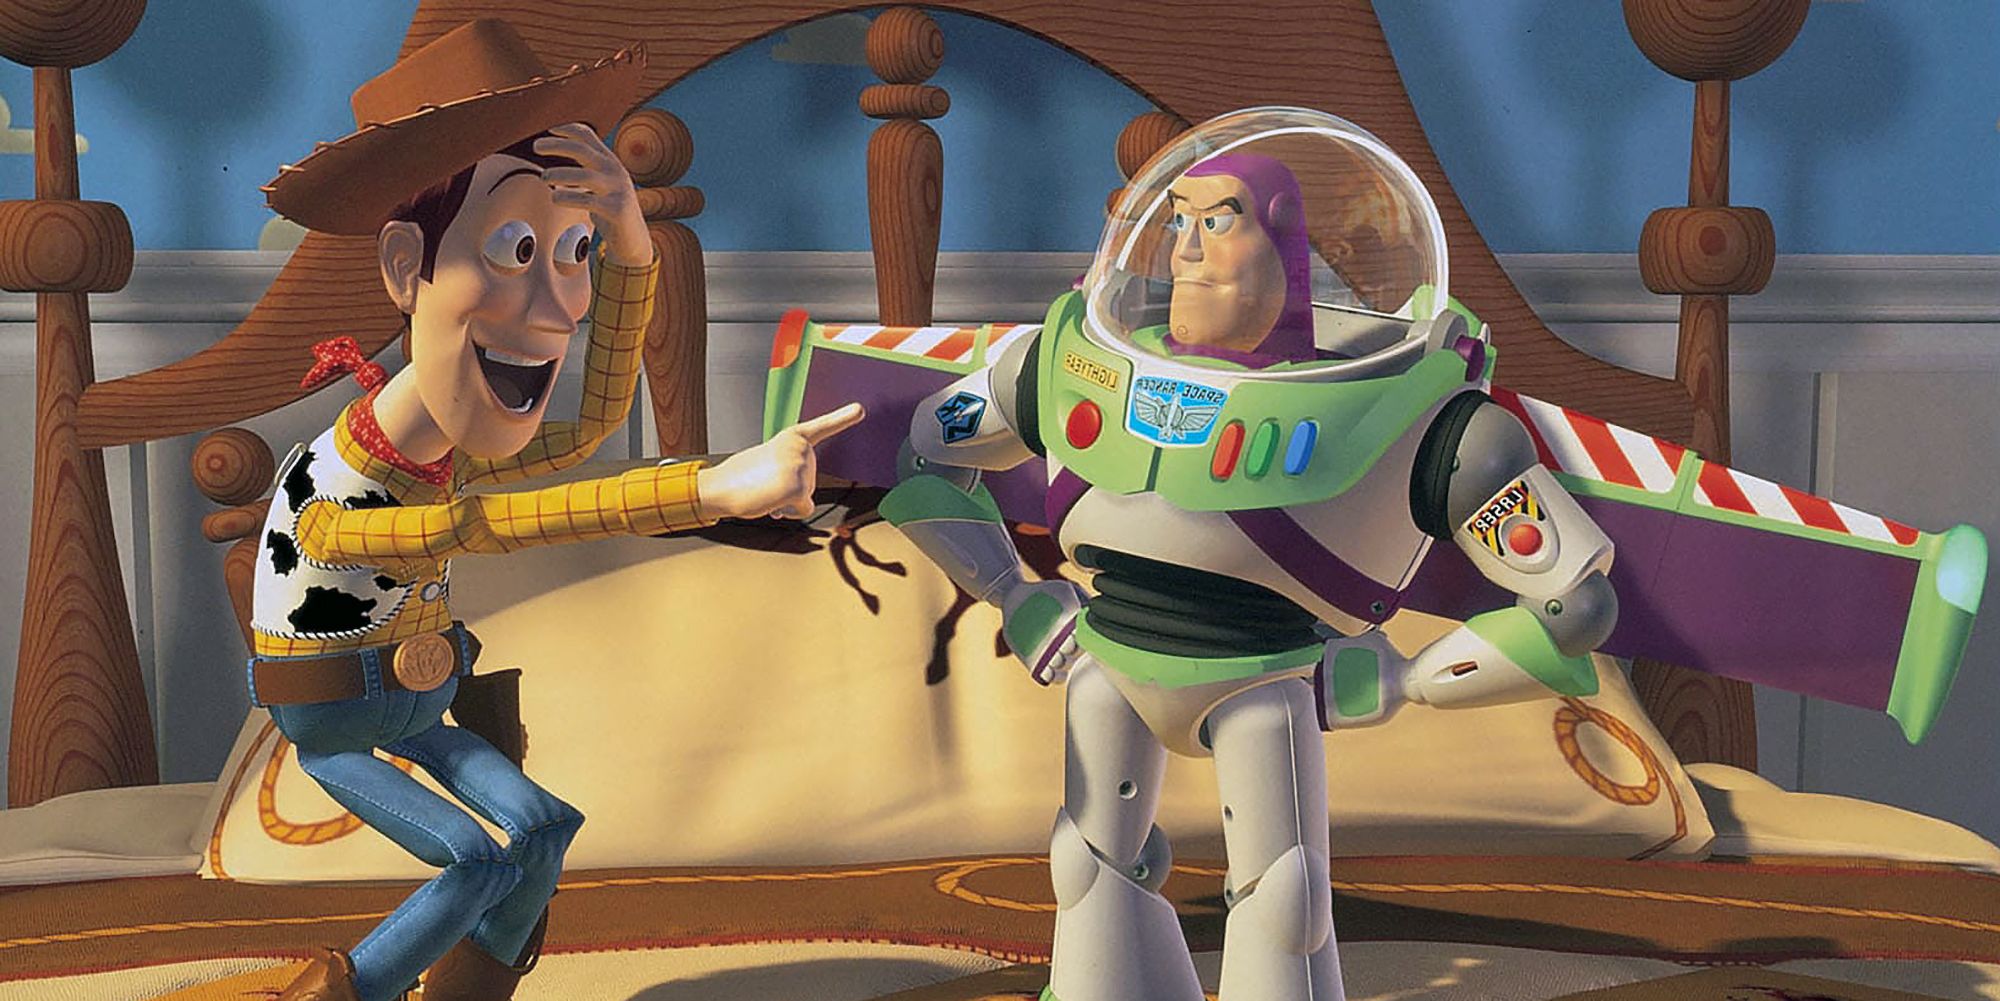 'Toy Story' started out as a much darker movie than the one that audiences came to love